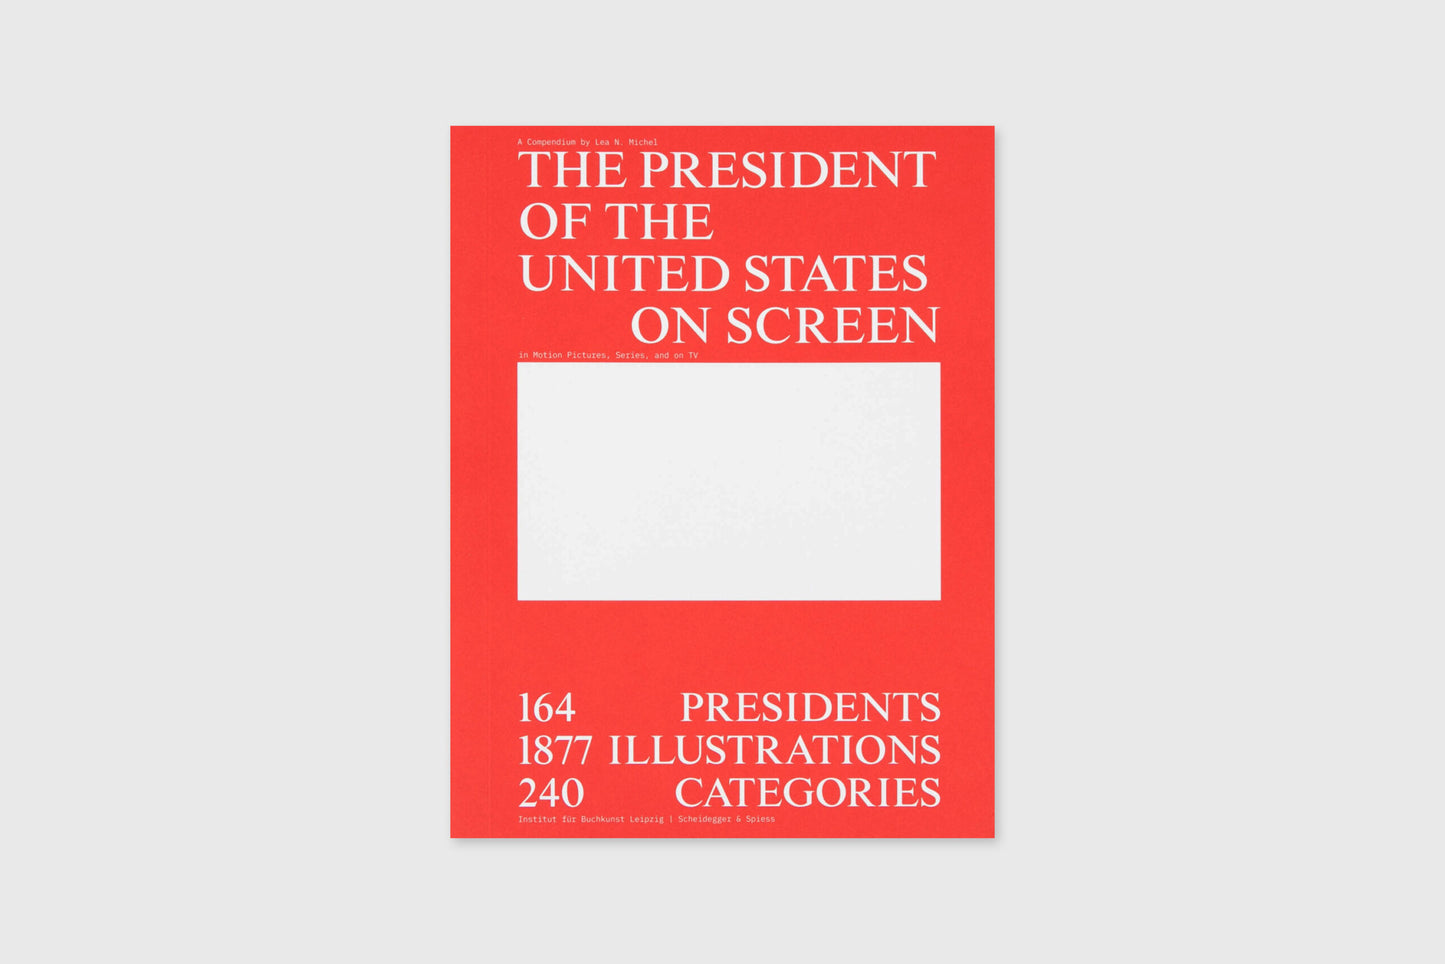 The President of the United States on Screen